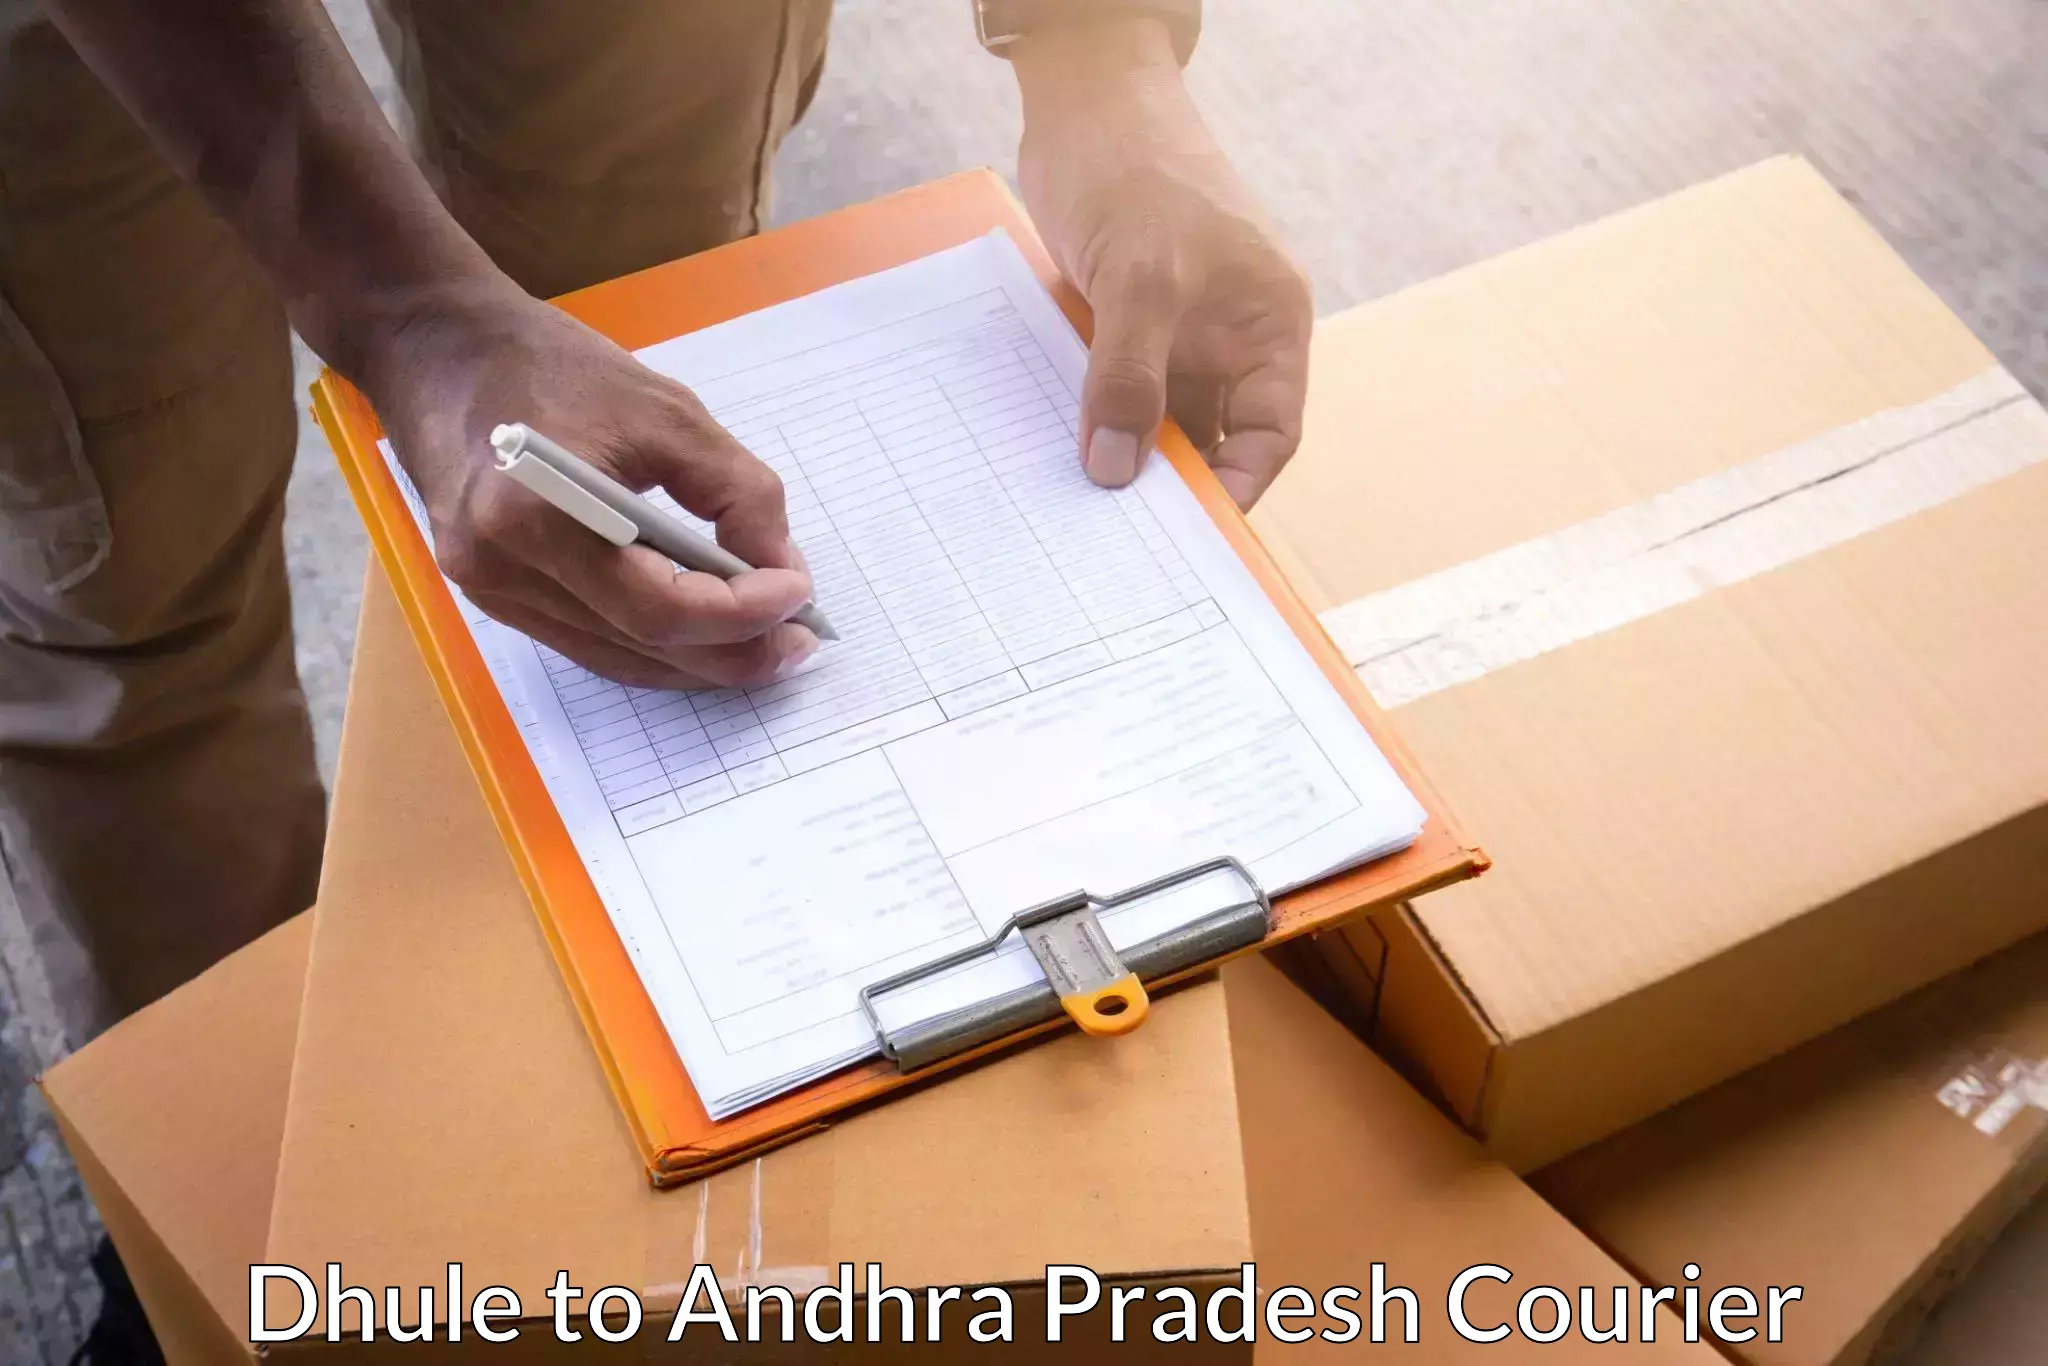 On-demand shipping options in Dhule to Vidyanagar Nellore